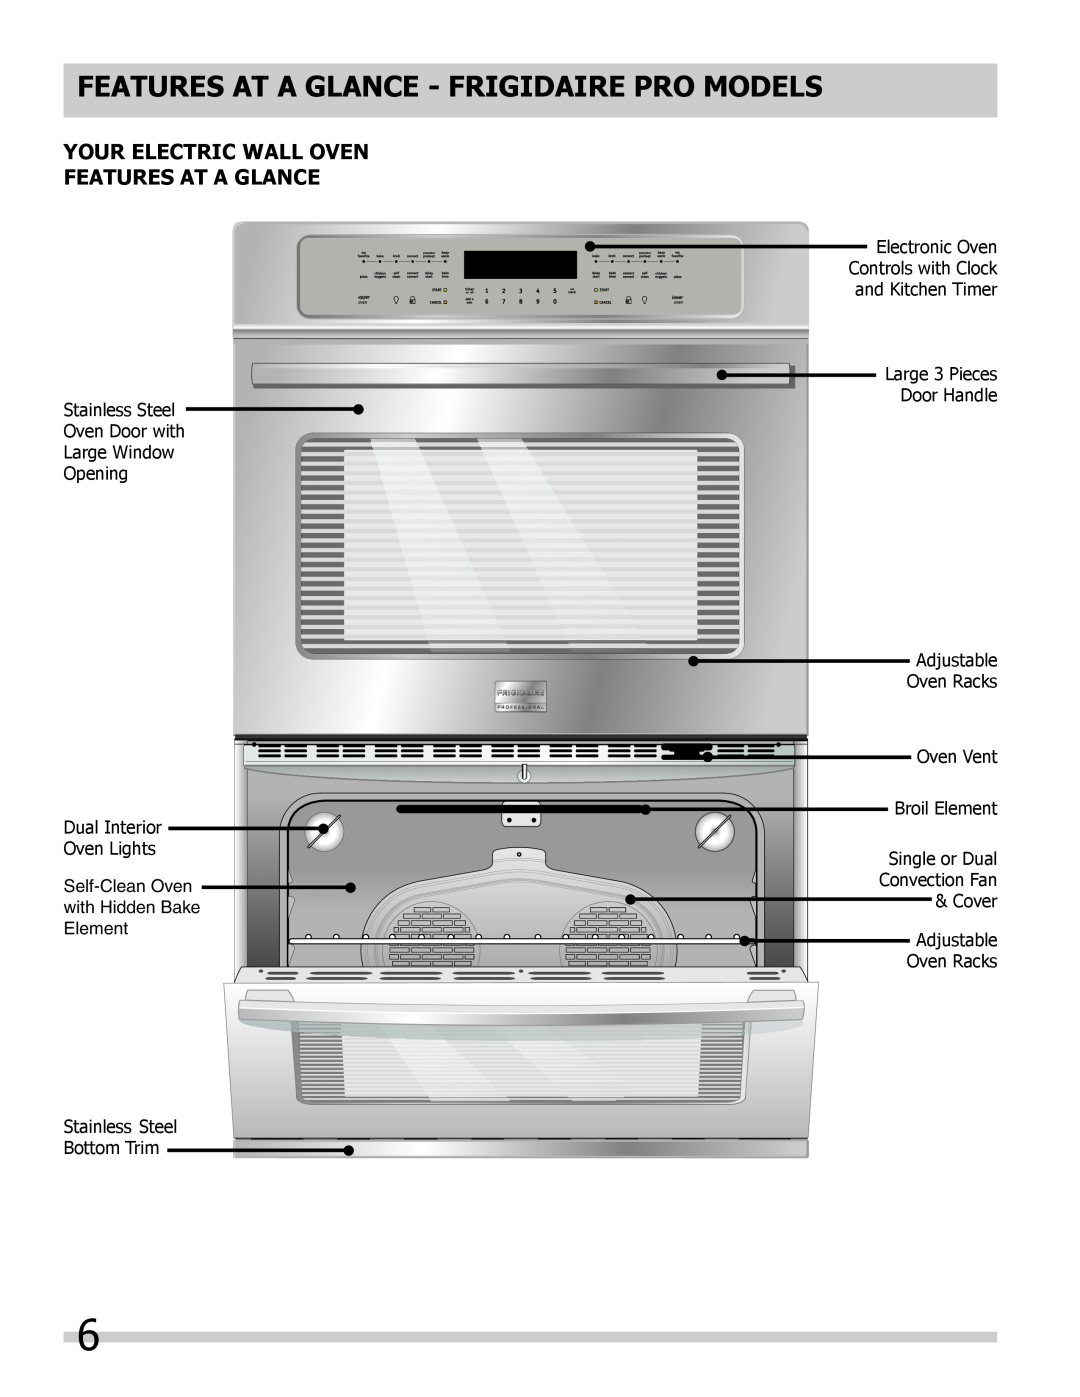 Frigidaire FGET2745KB manual Features At A Glance - Frigidaire Pro Models, Your Electric Wall Oven Features At A Glance 